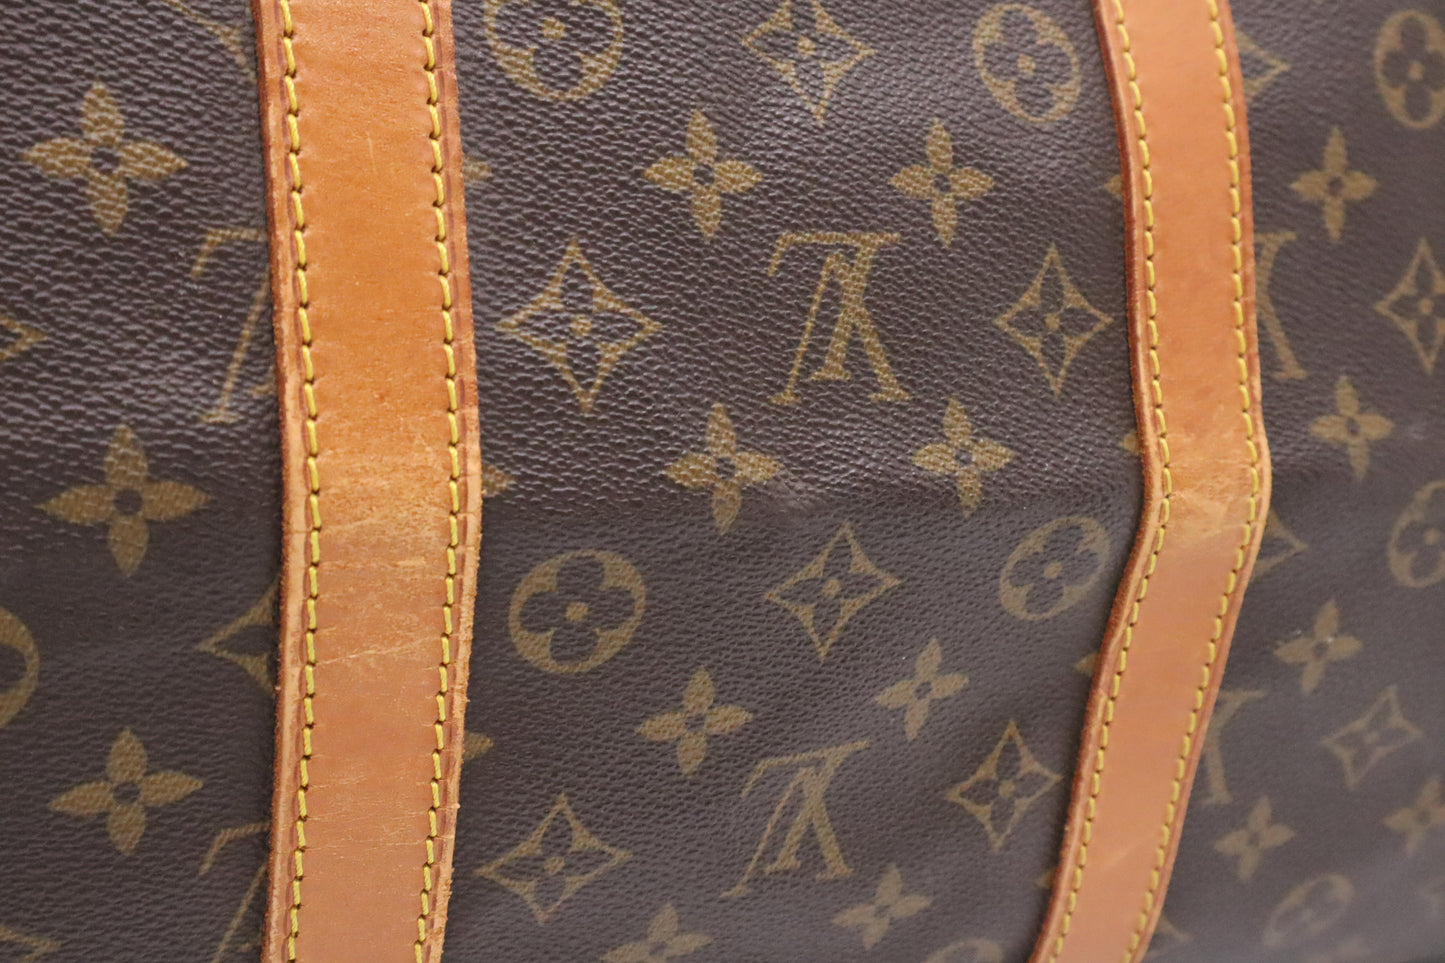 Louis Vuitton Keepall 55 Bandouliere in Monogram Canvas